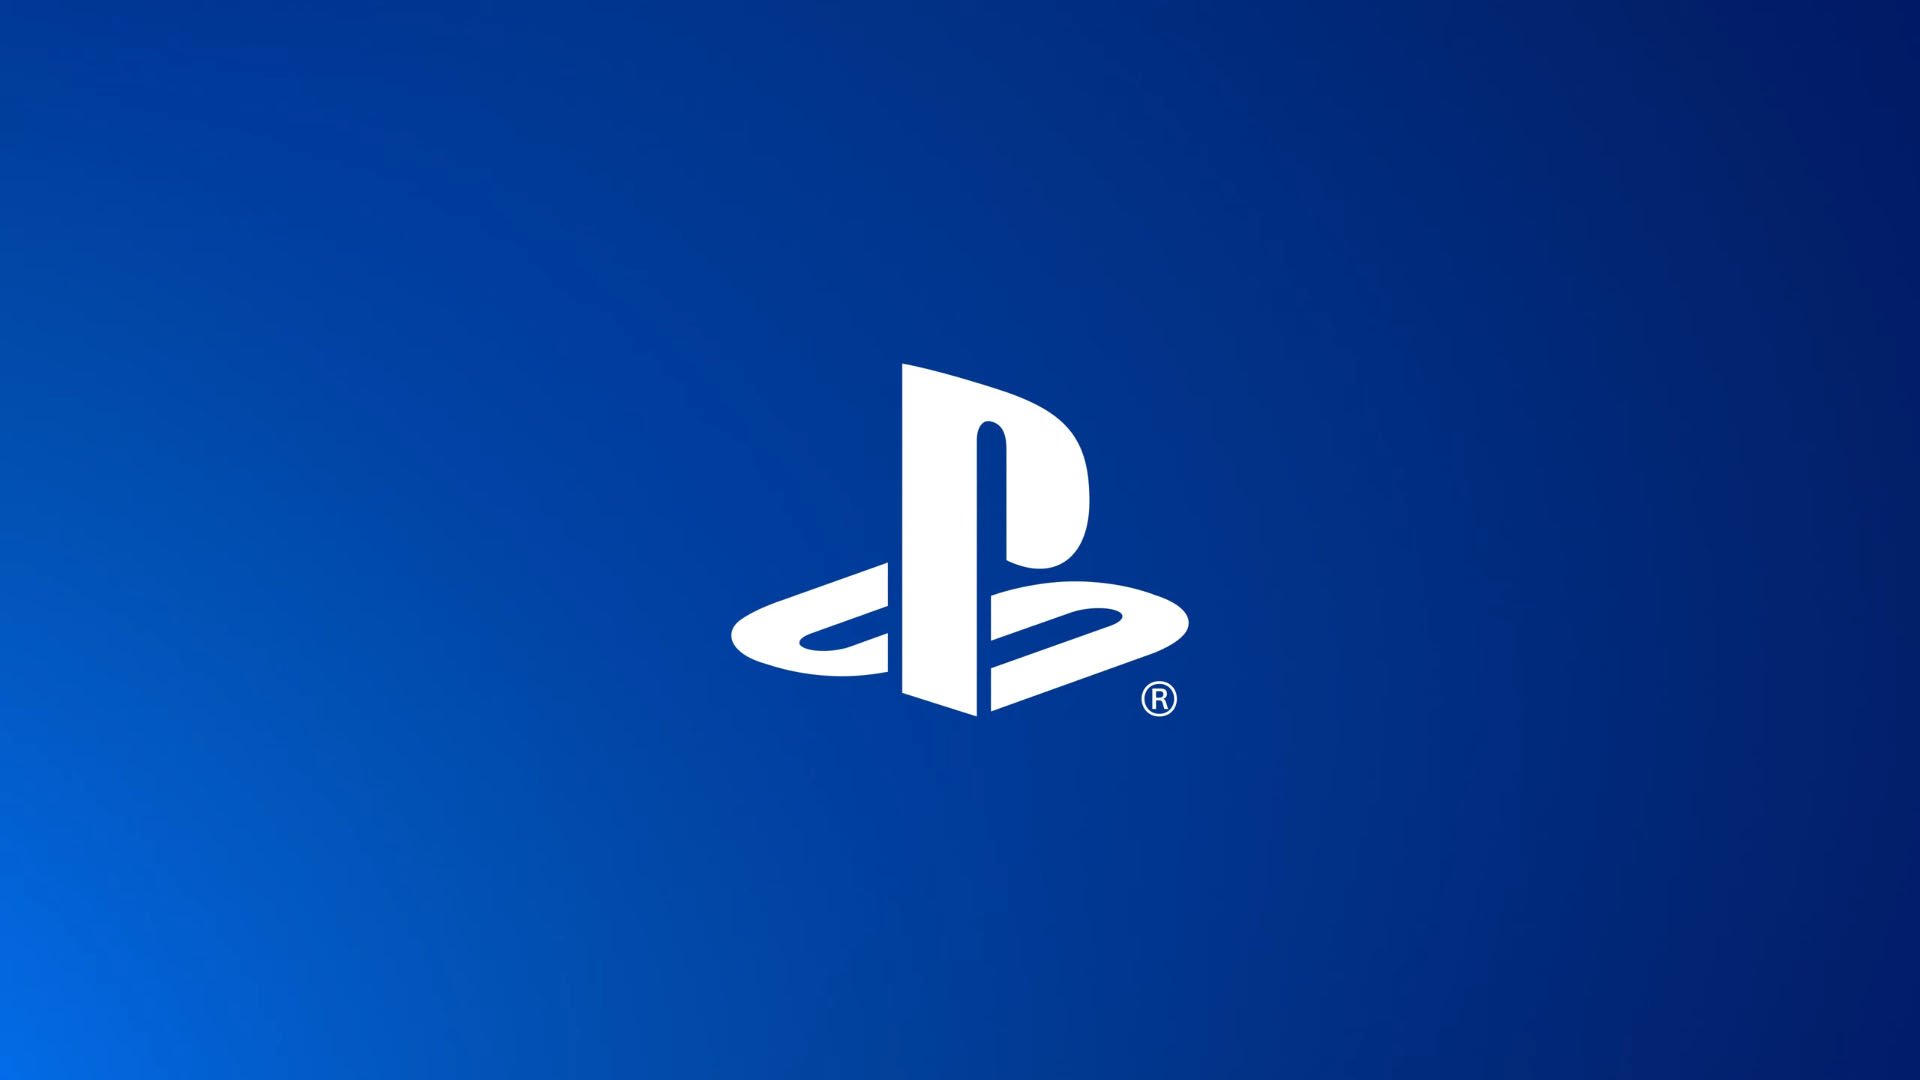 Everything shown in Sony's PlayStation Showcase 2021